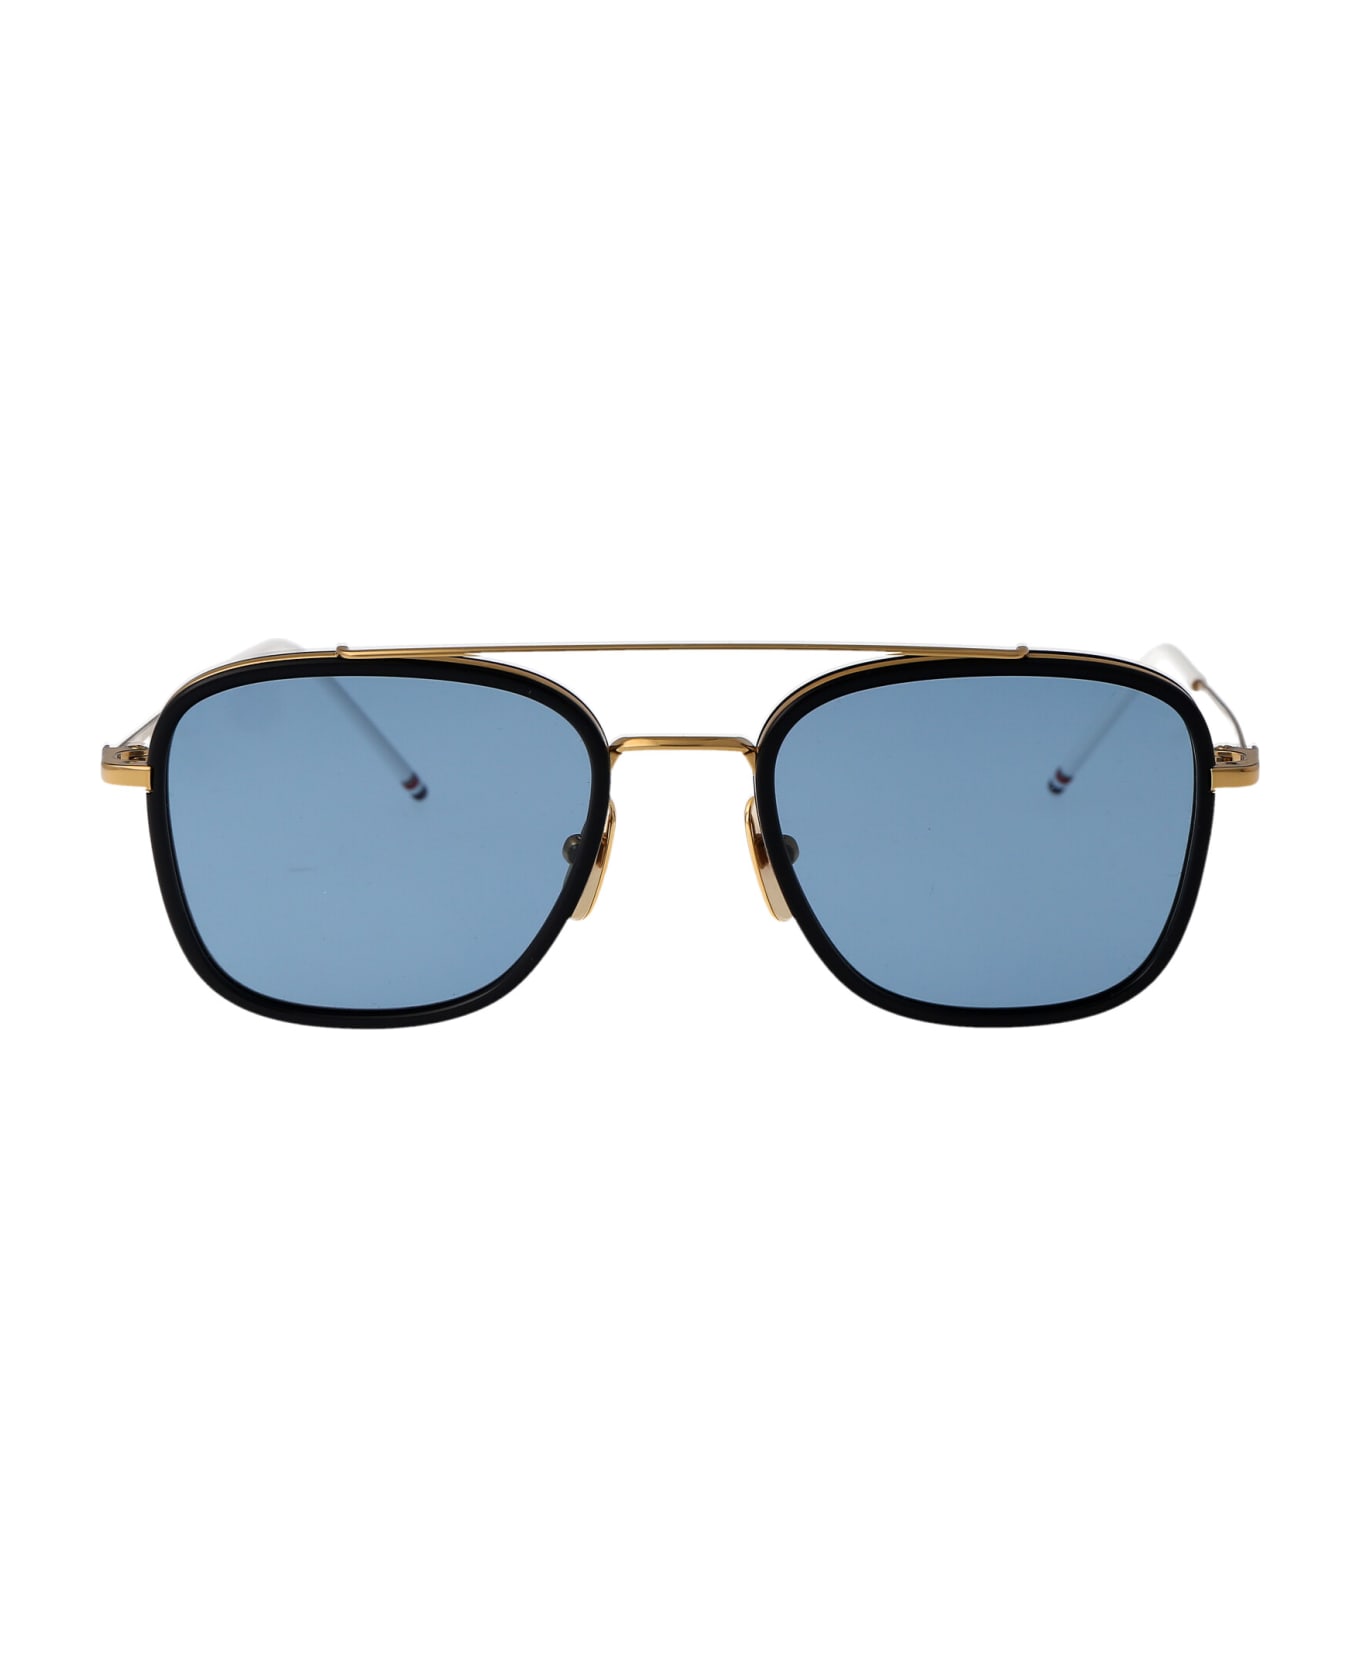 Thom Browne Ues800a-g0003-415-51 Sunglasses - 415 NAVY